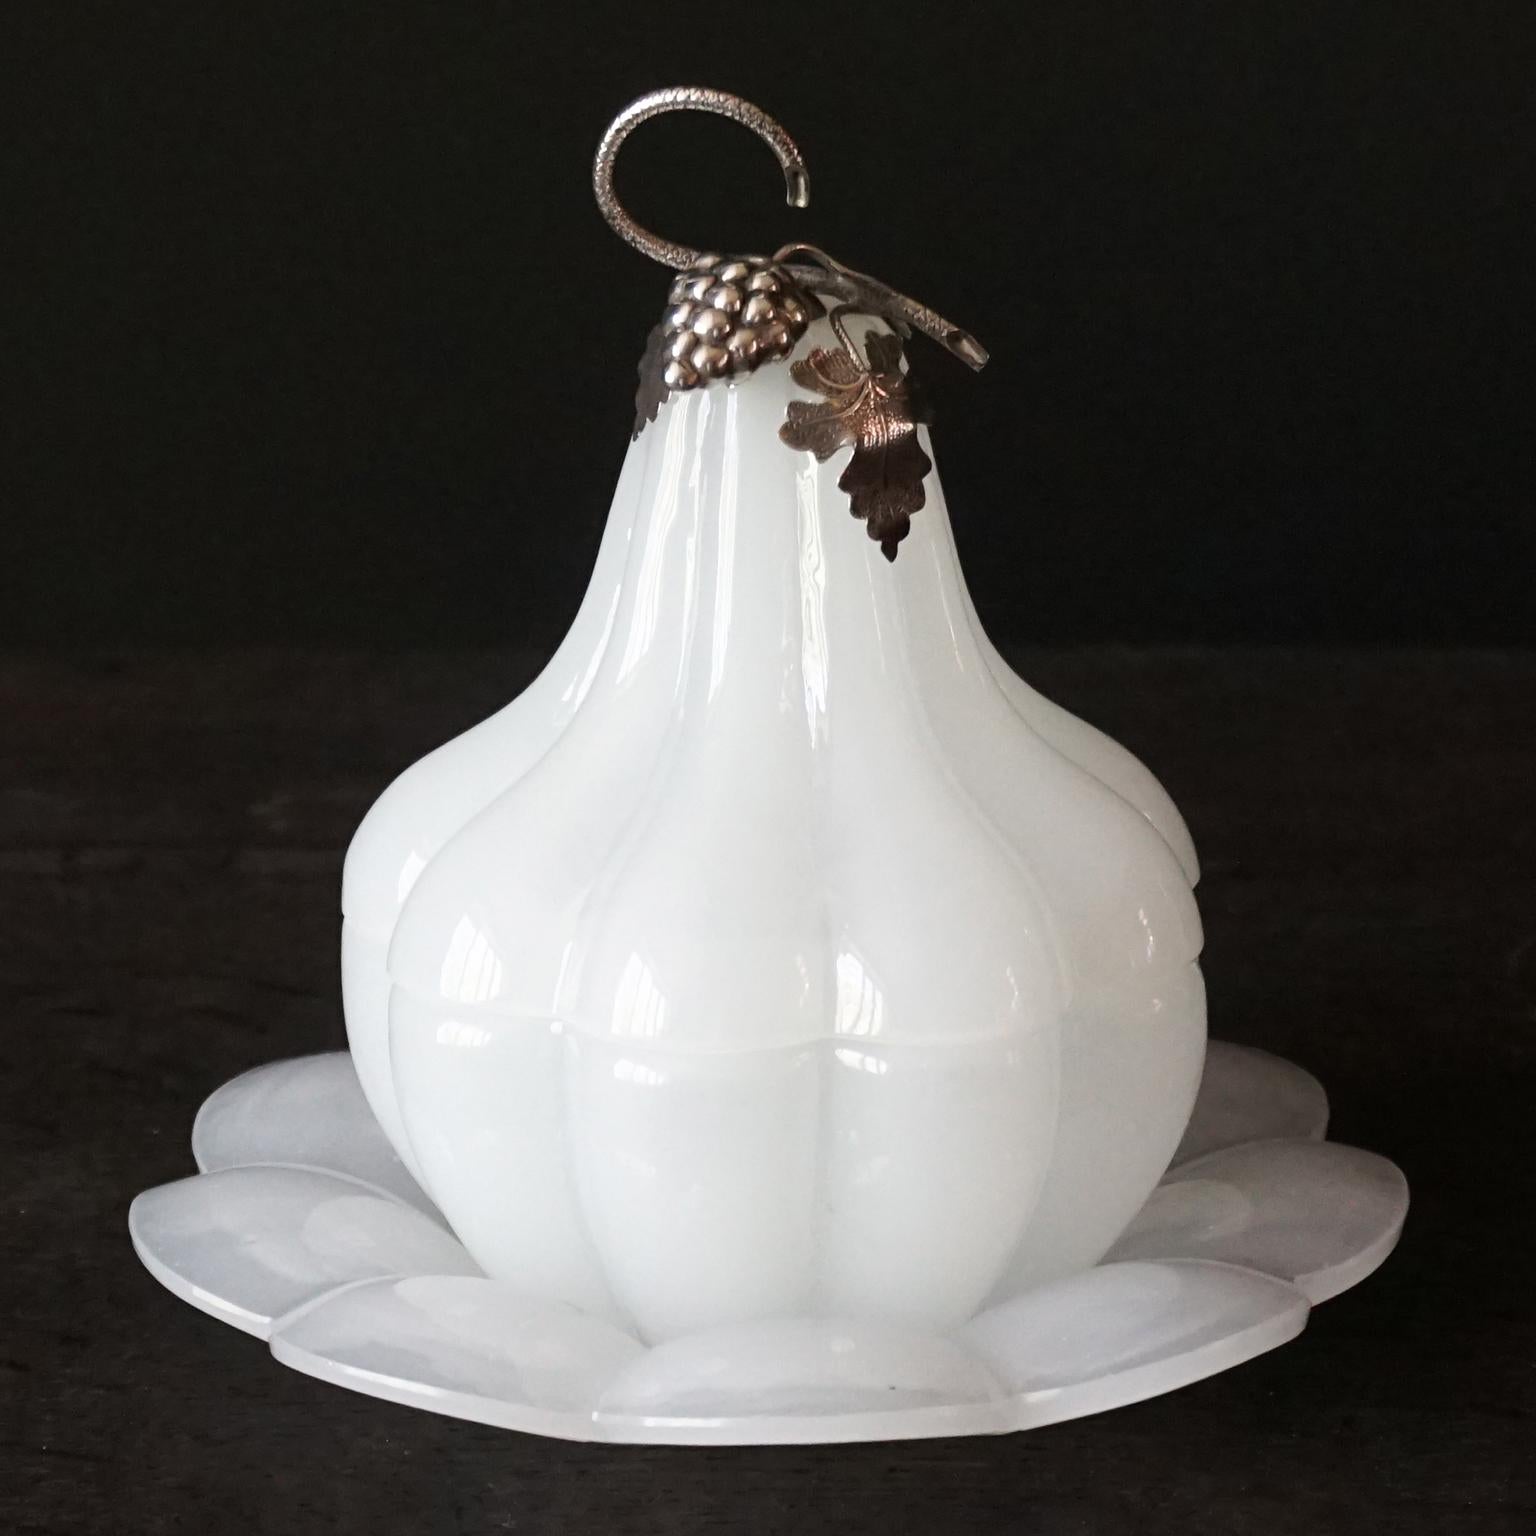 European 1950s White Opaline Glass Pear or Gourd Lidded Jar with Silver Grapes and Leaves For Sale